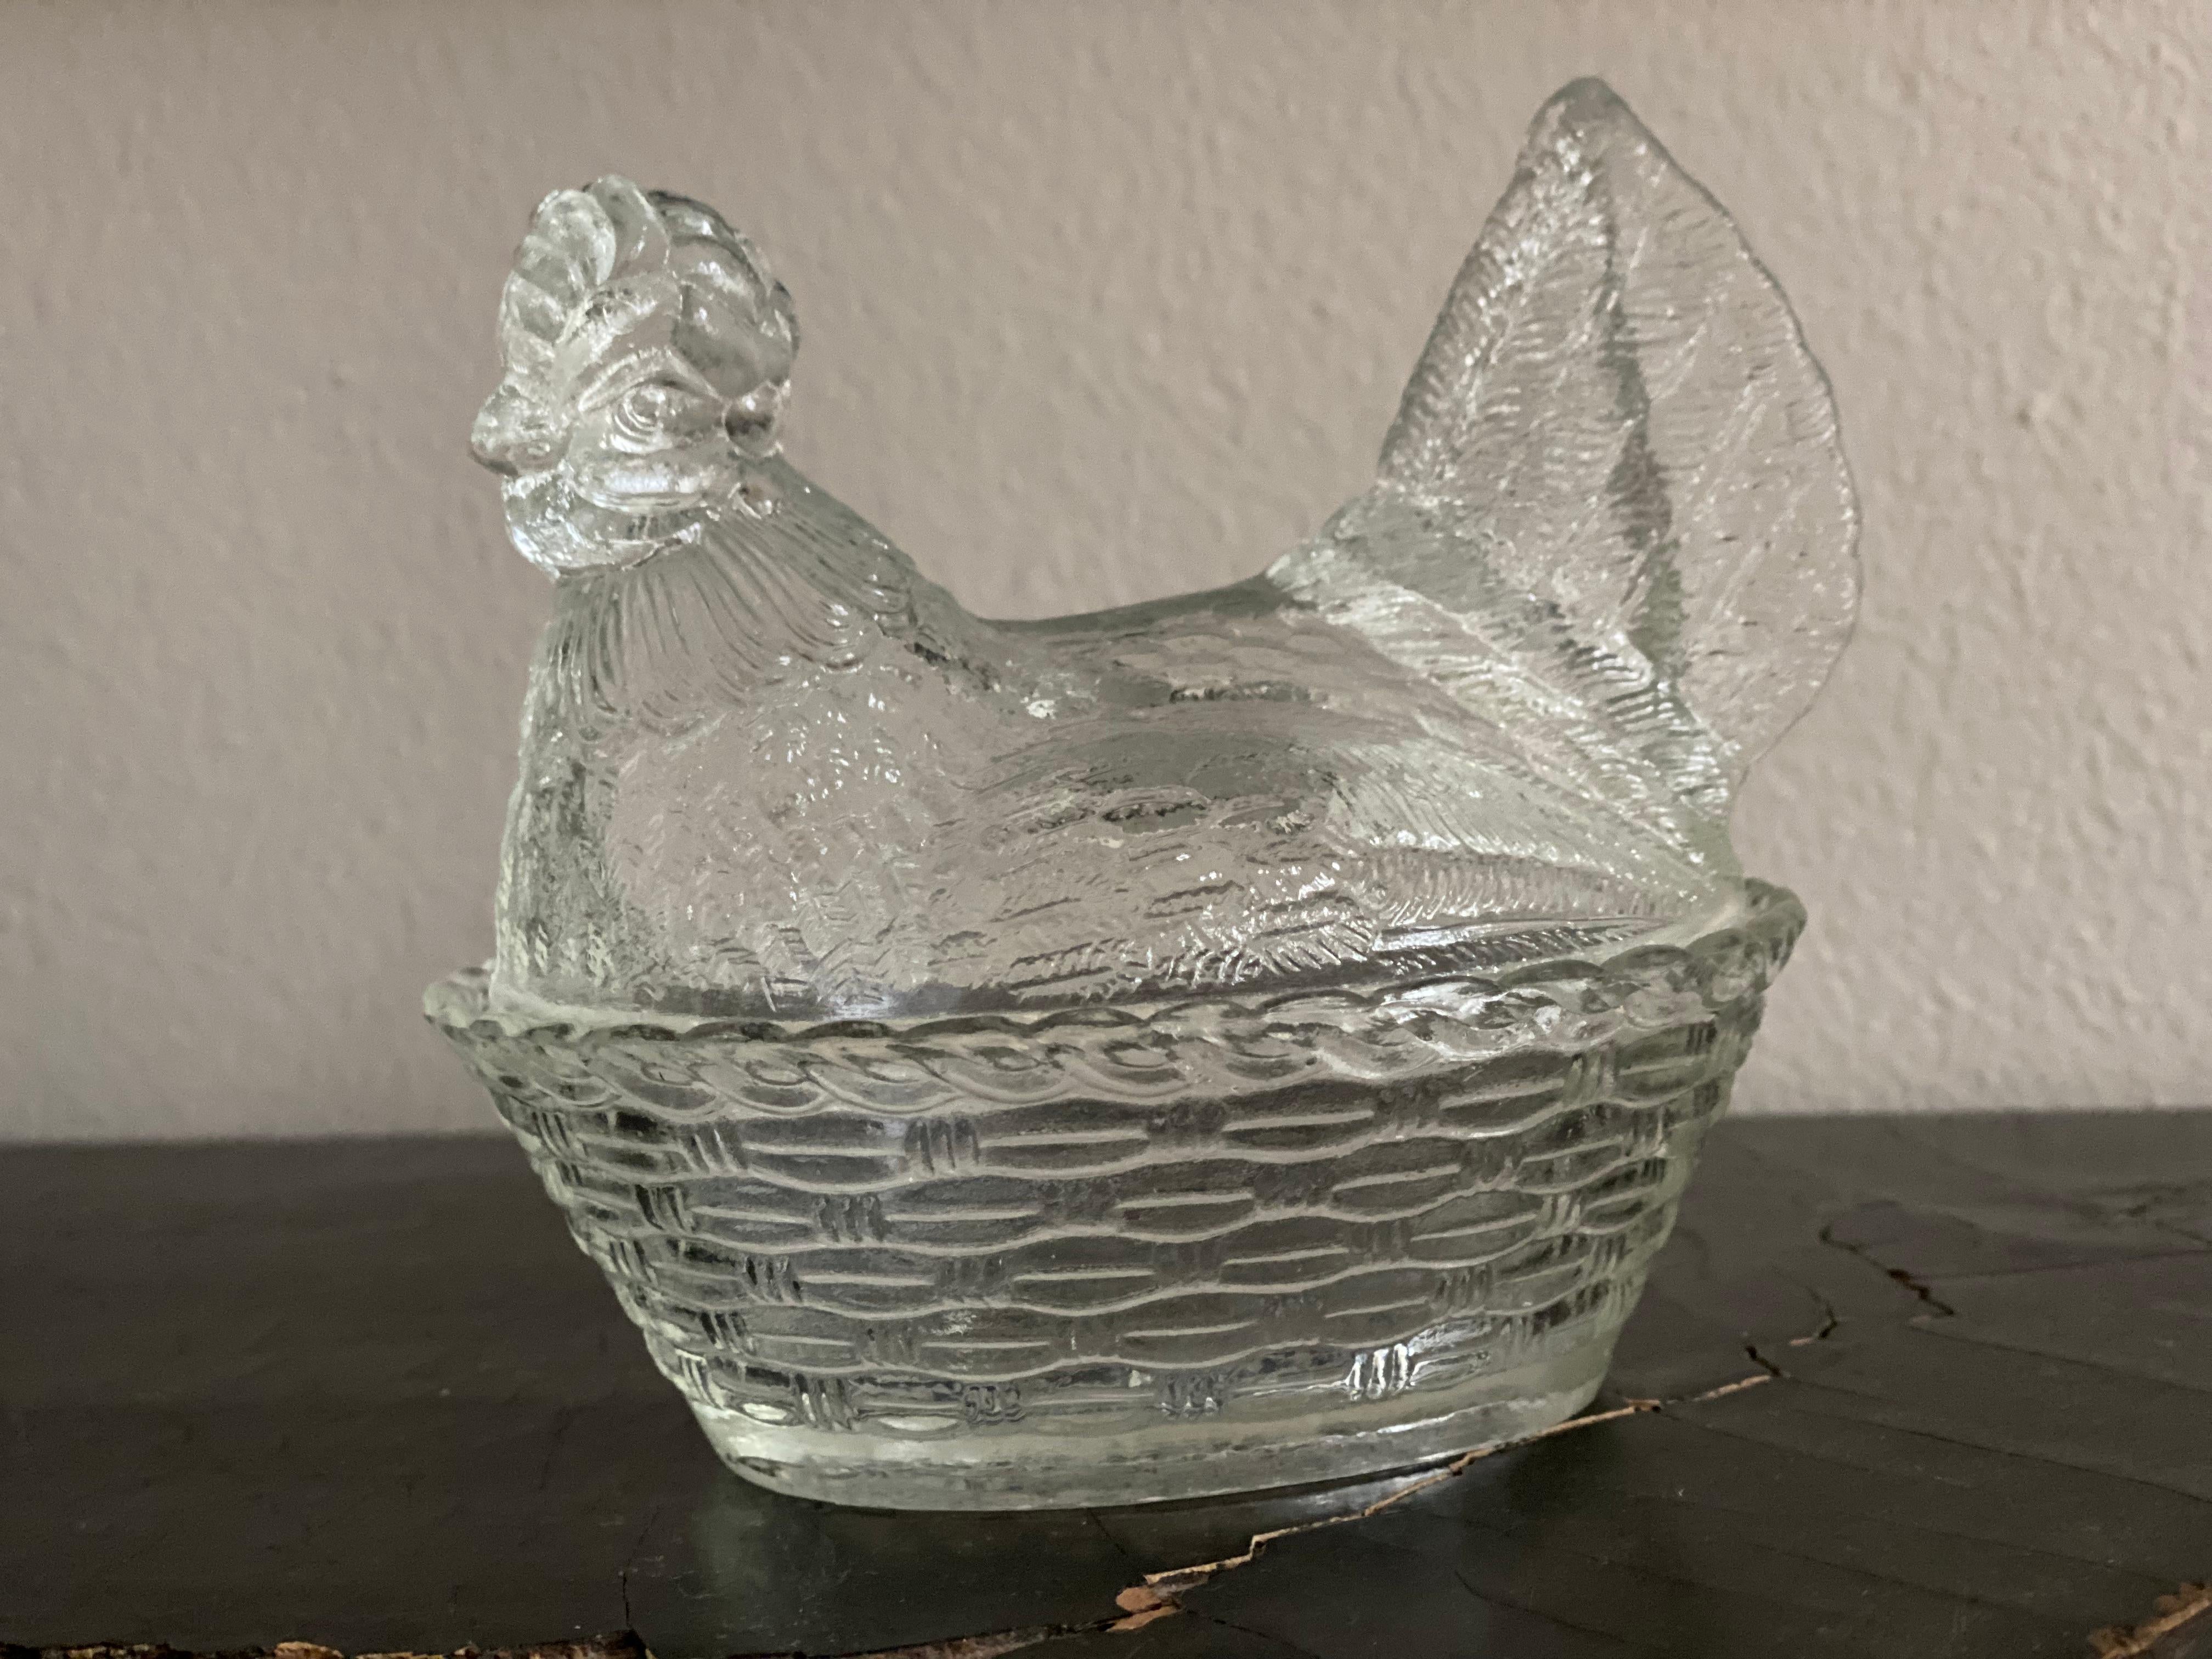 Pair of Lidded Cans/Bonbonniere Made of Pressed Glass, Hens in a Basket For Sale 2